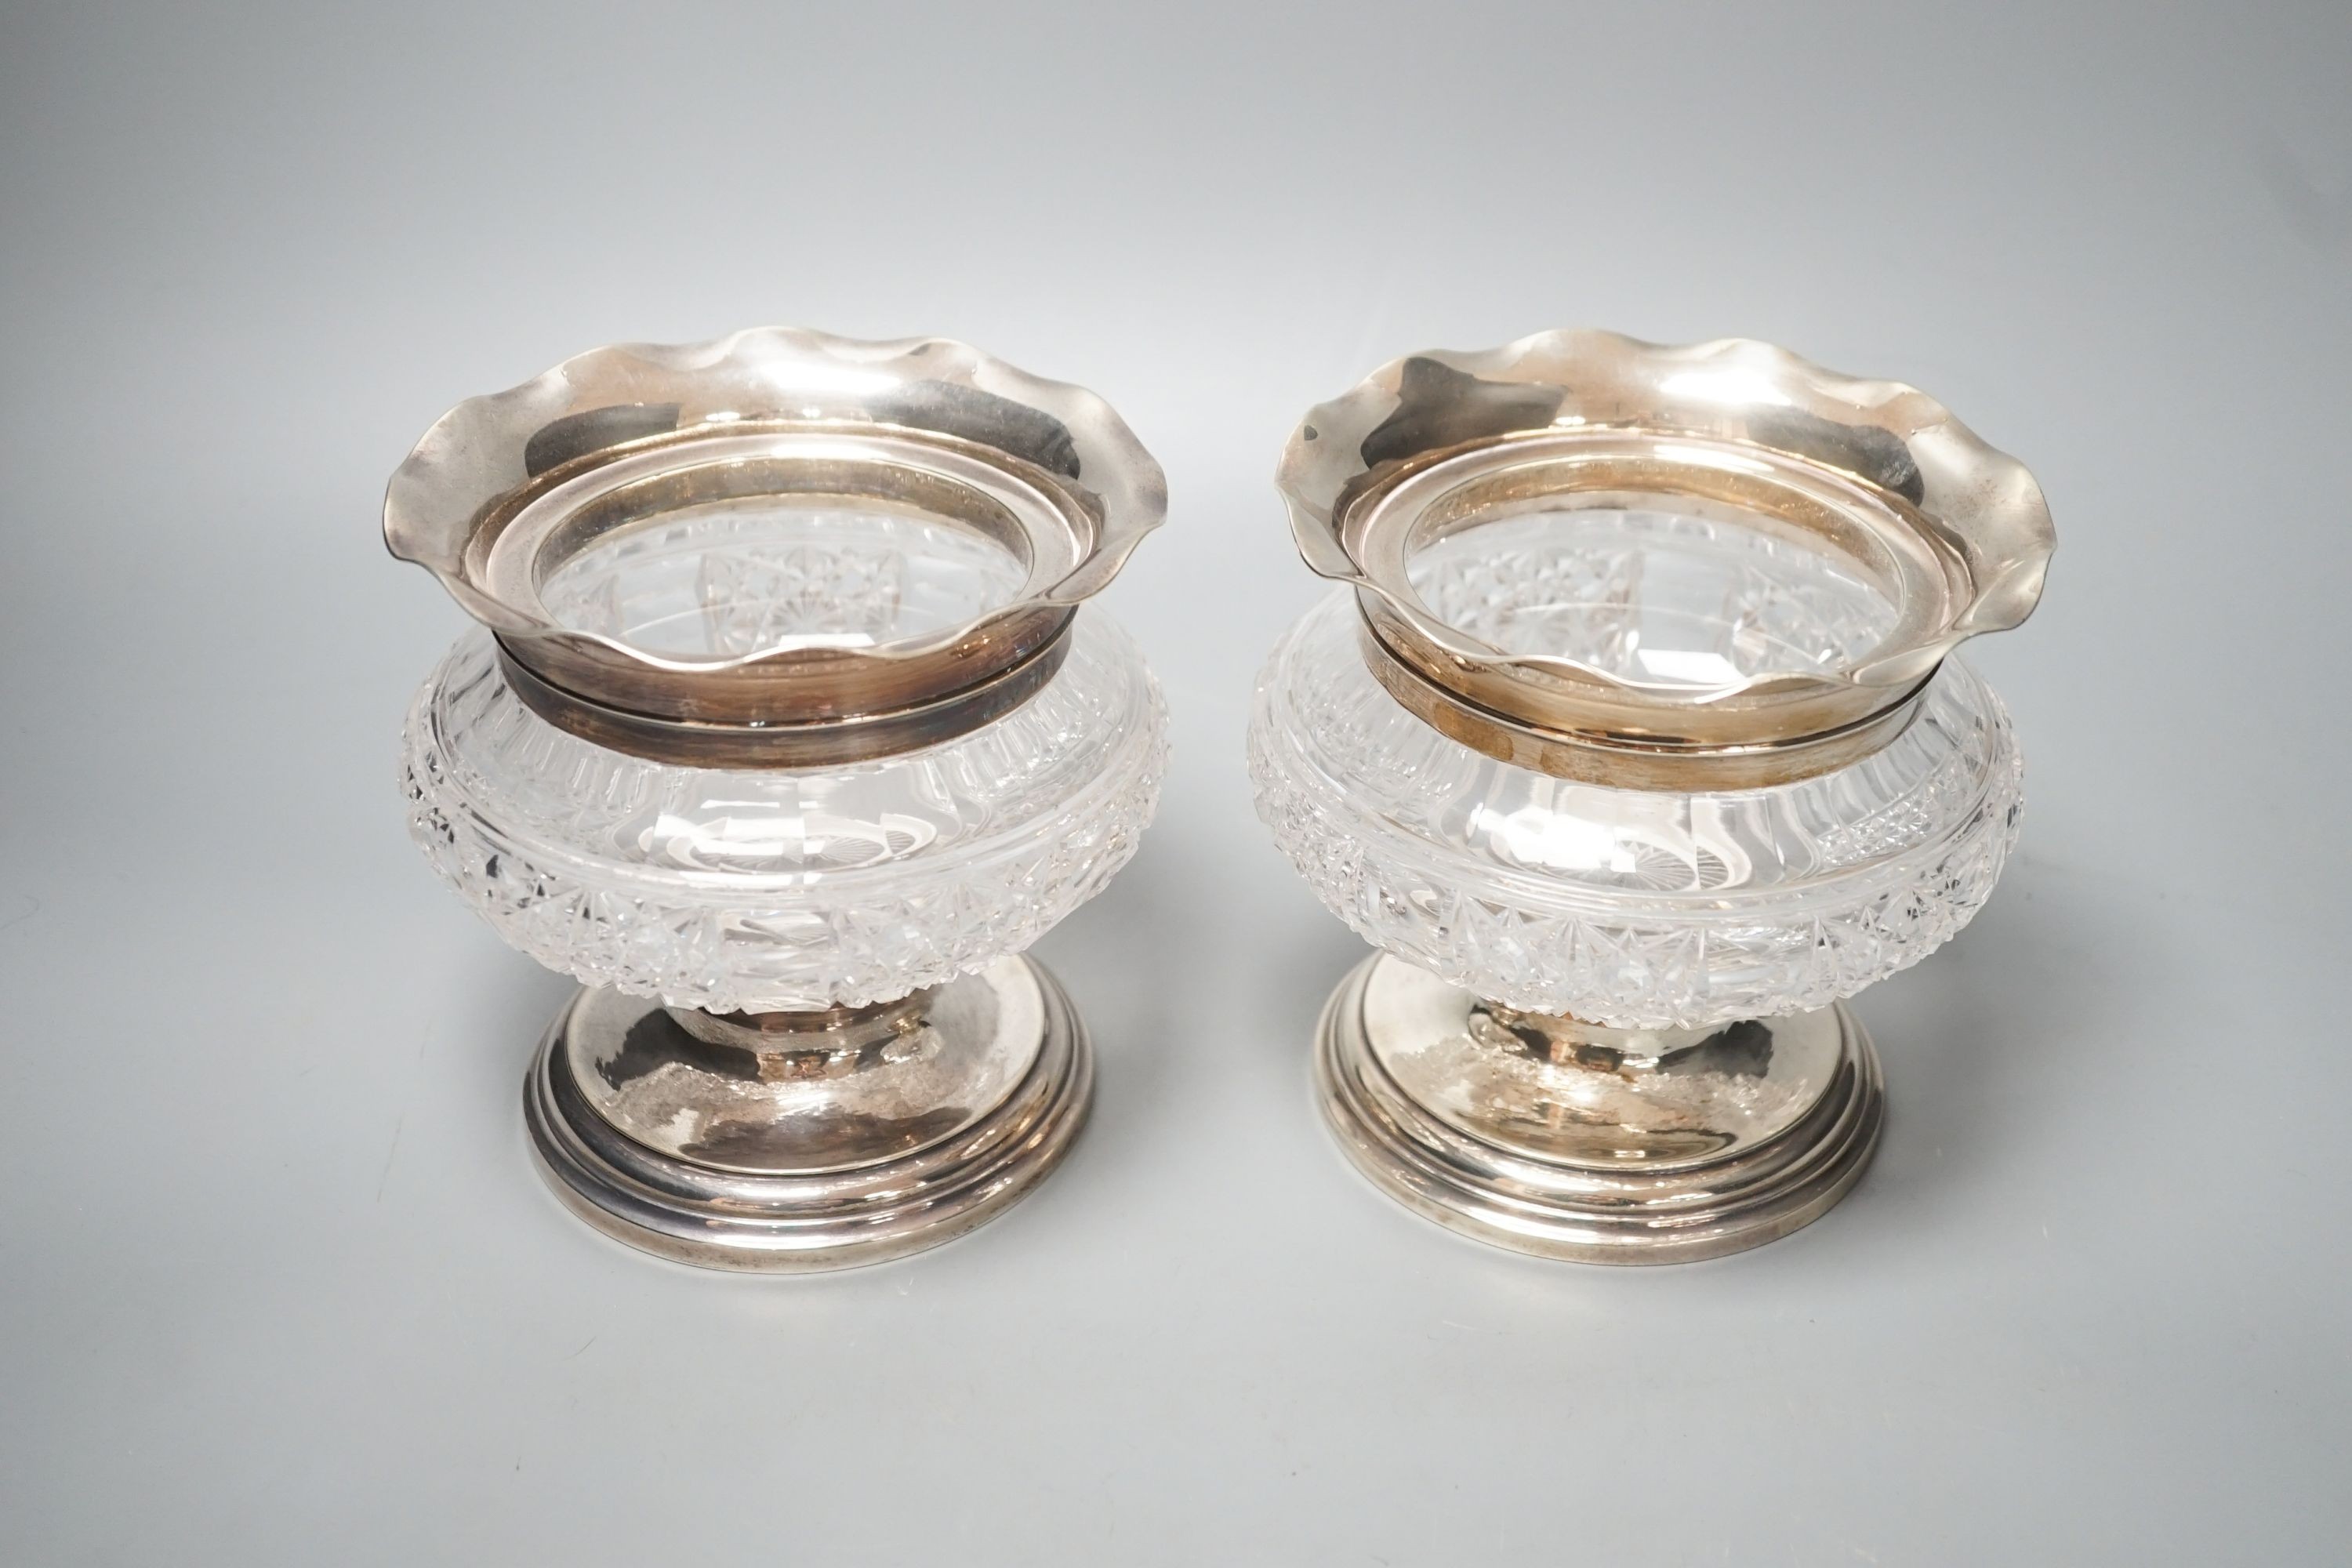 A pair of Edwardian silver mounted glass bowls, (lacking covers), Birmingham, 1904, height 13.4cm.